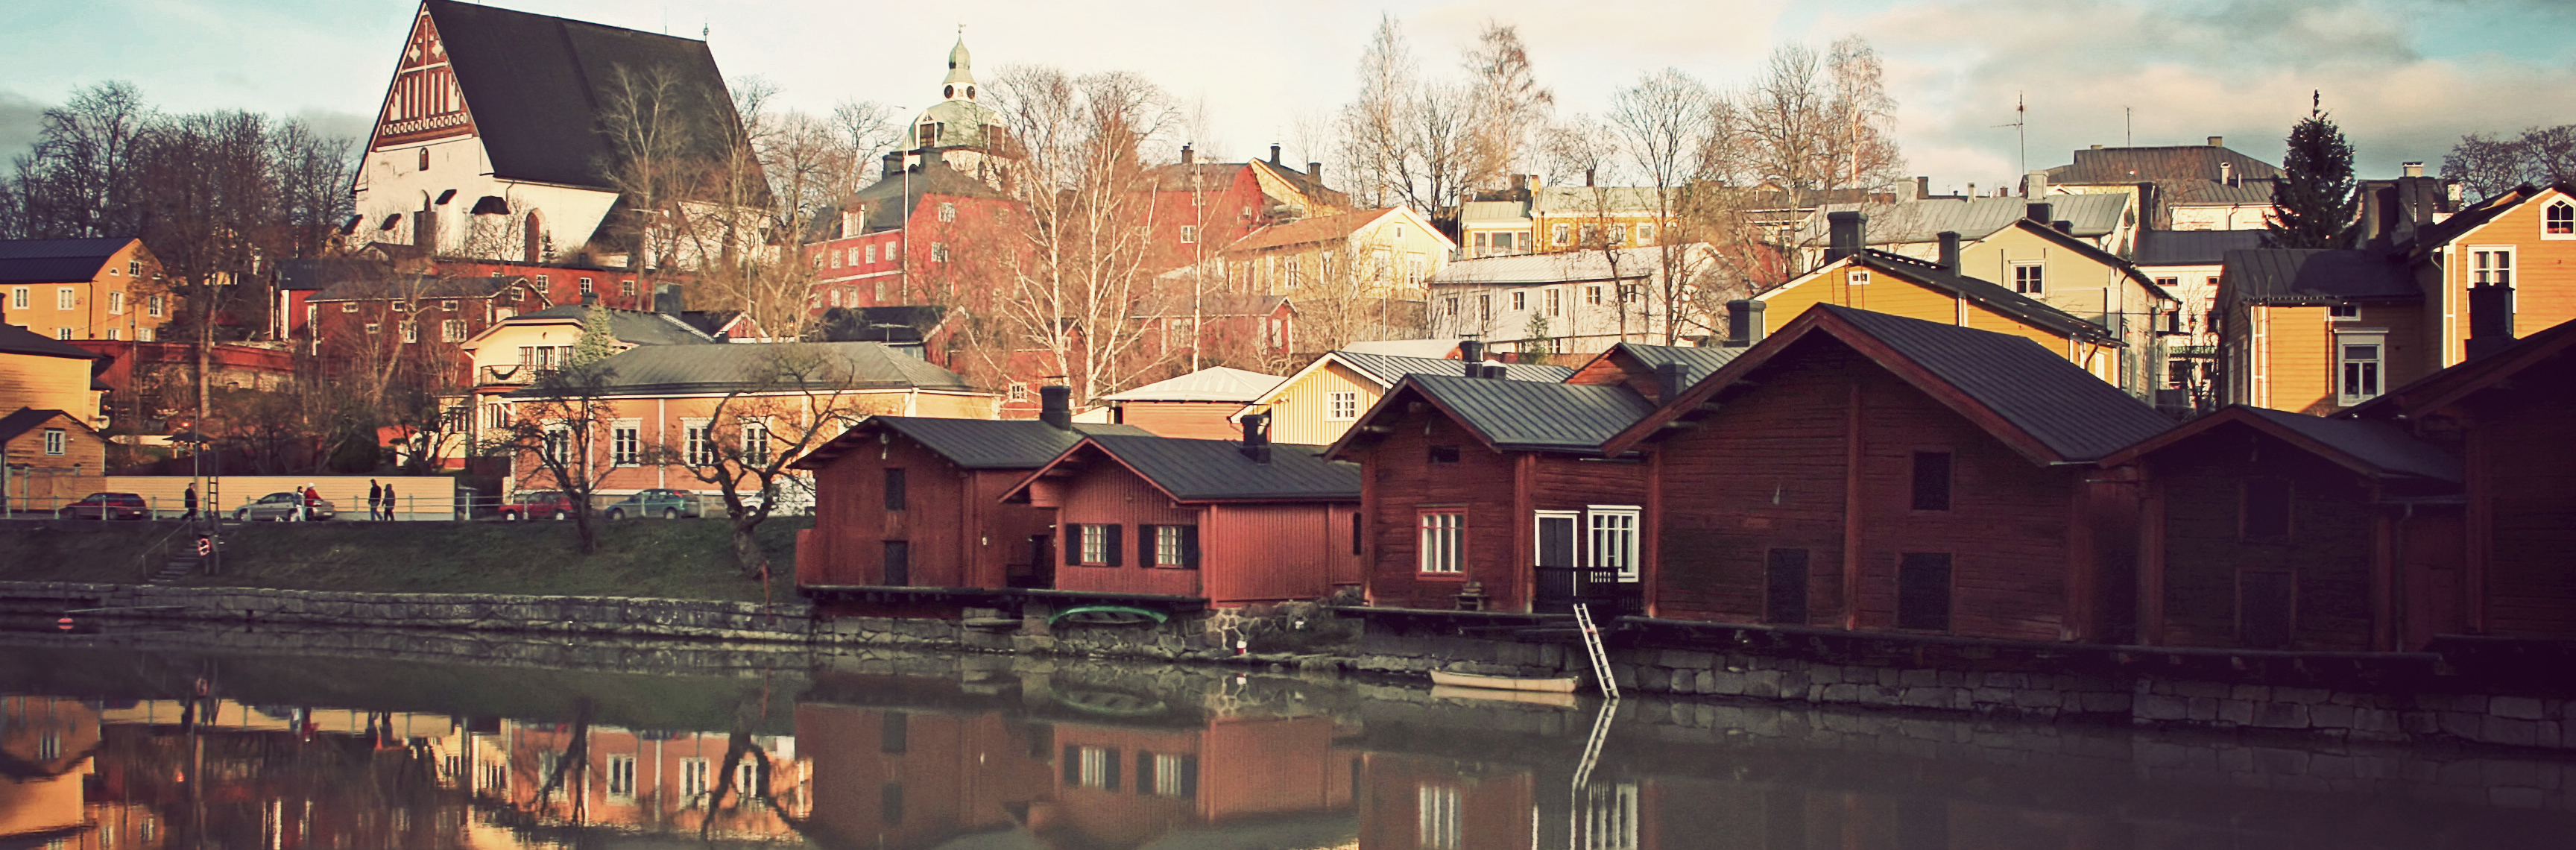 Cropped 2218 finland townporvoo